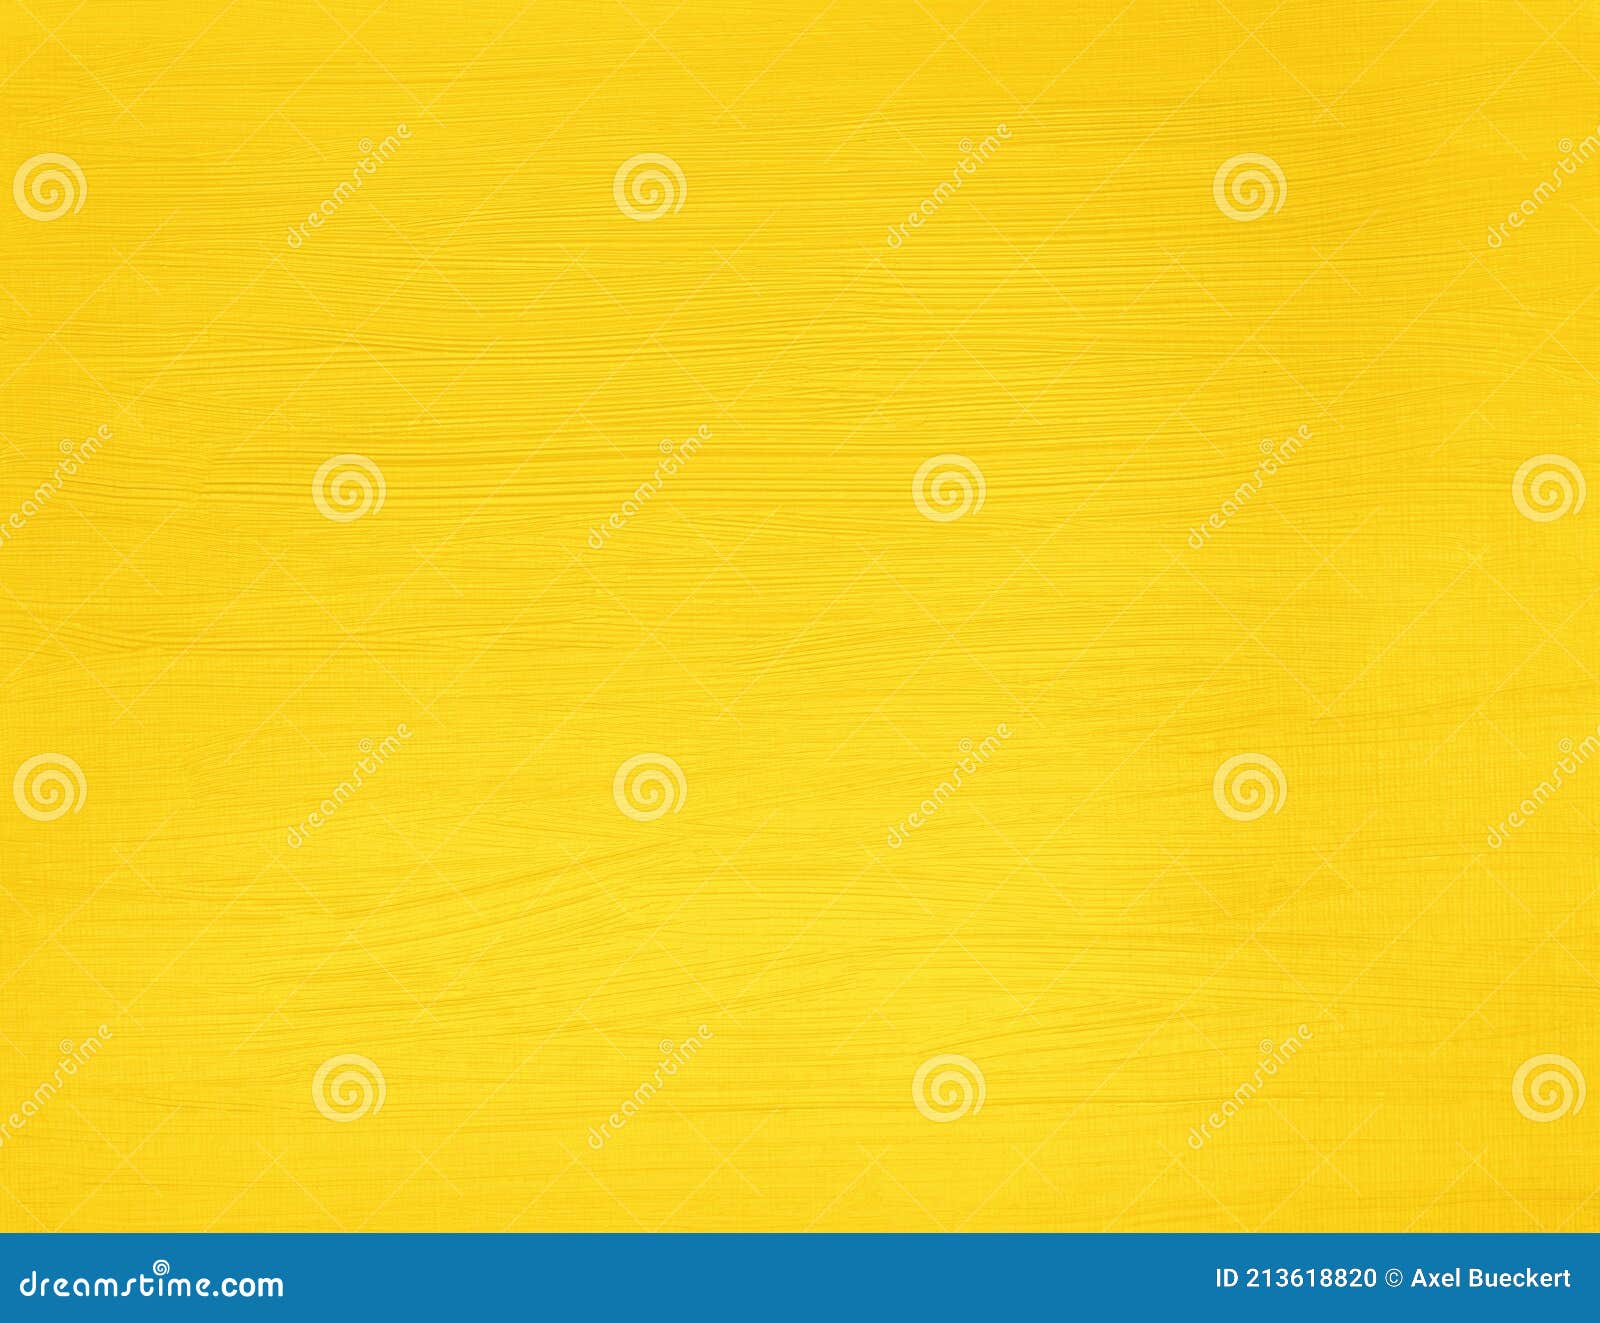 Hand-painted Yellow Acrylic Paint Background with Brush Stroke Texture ...